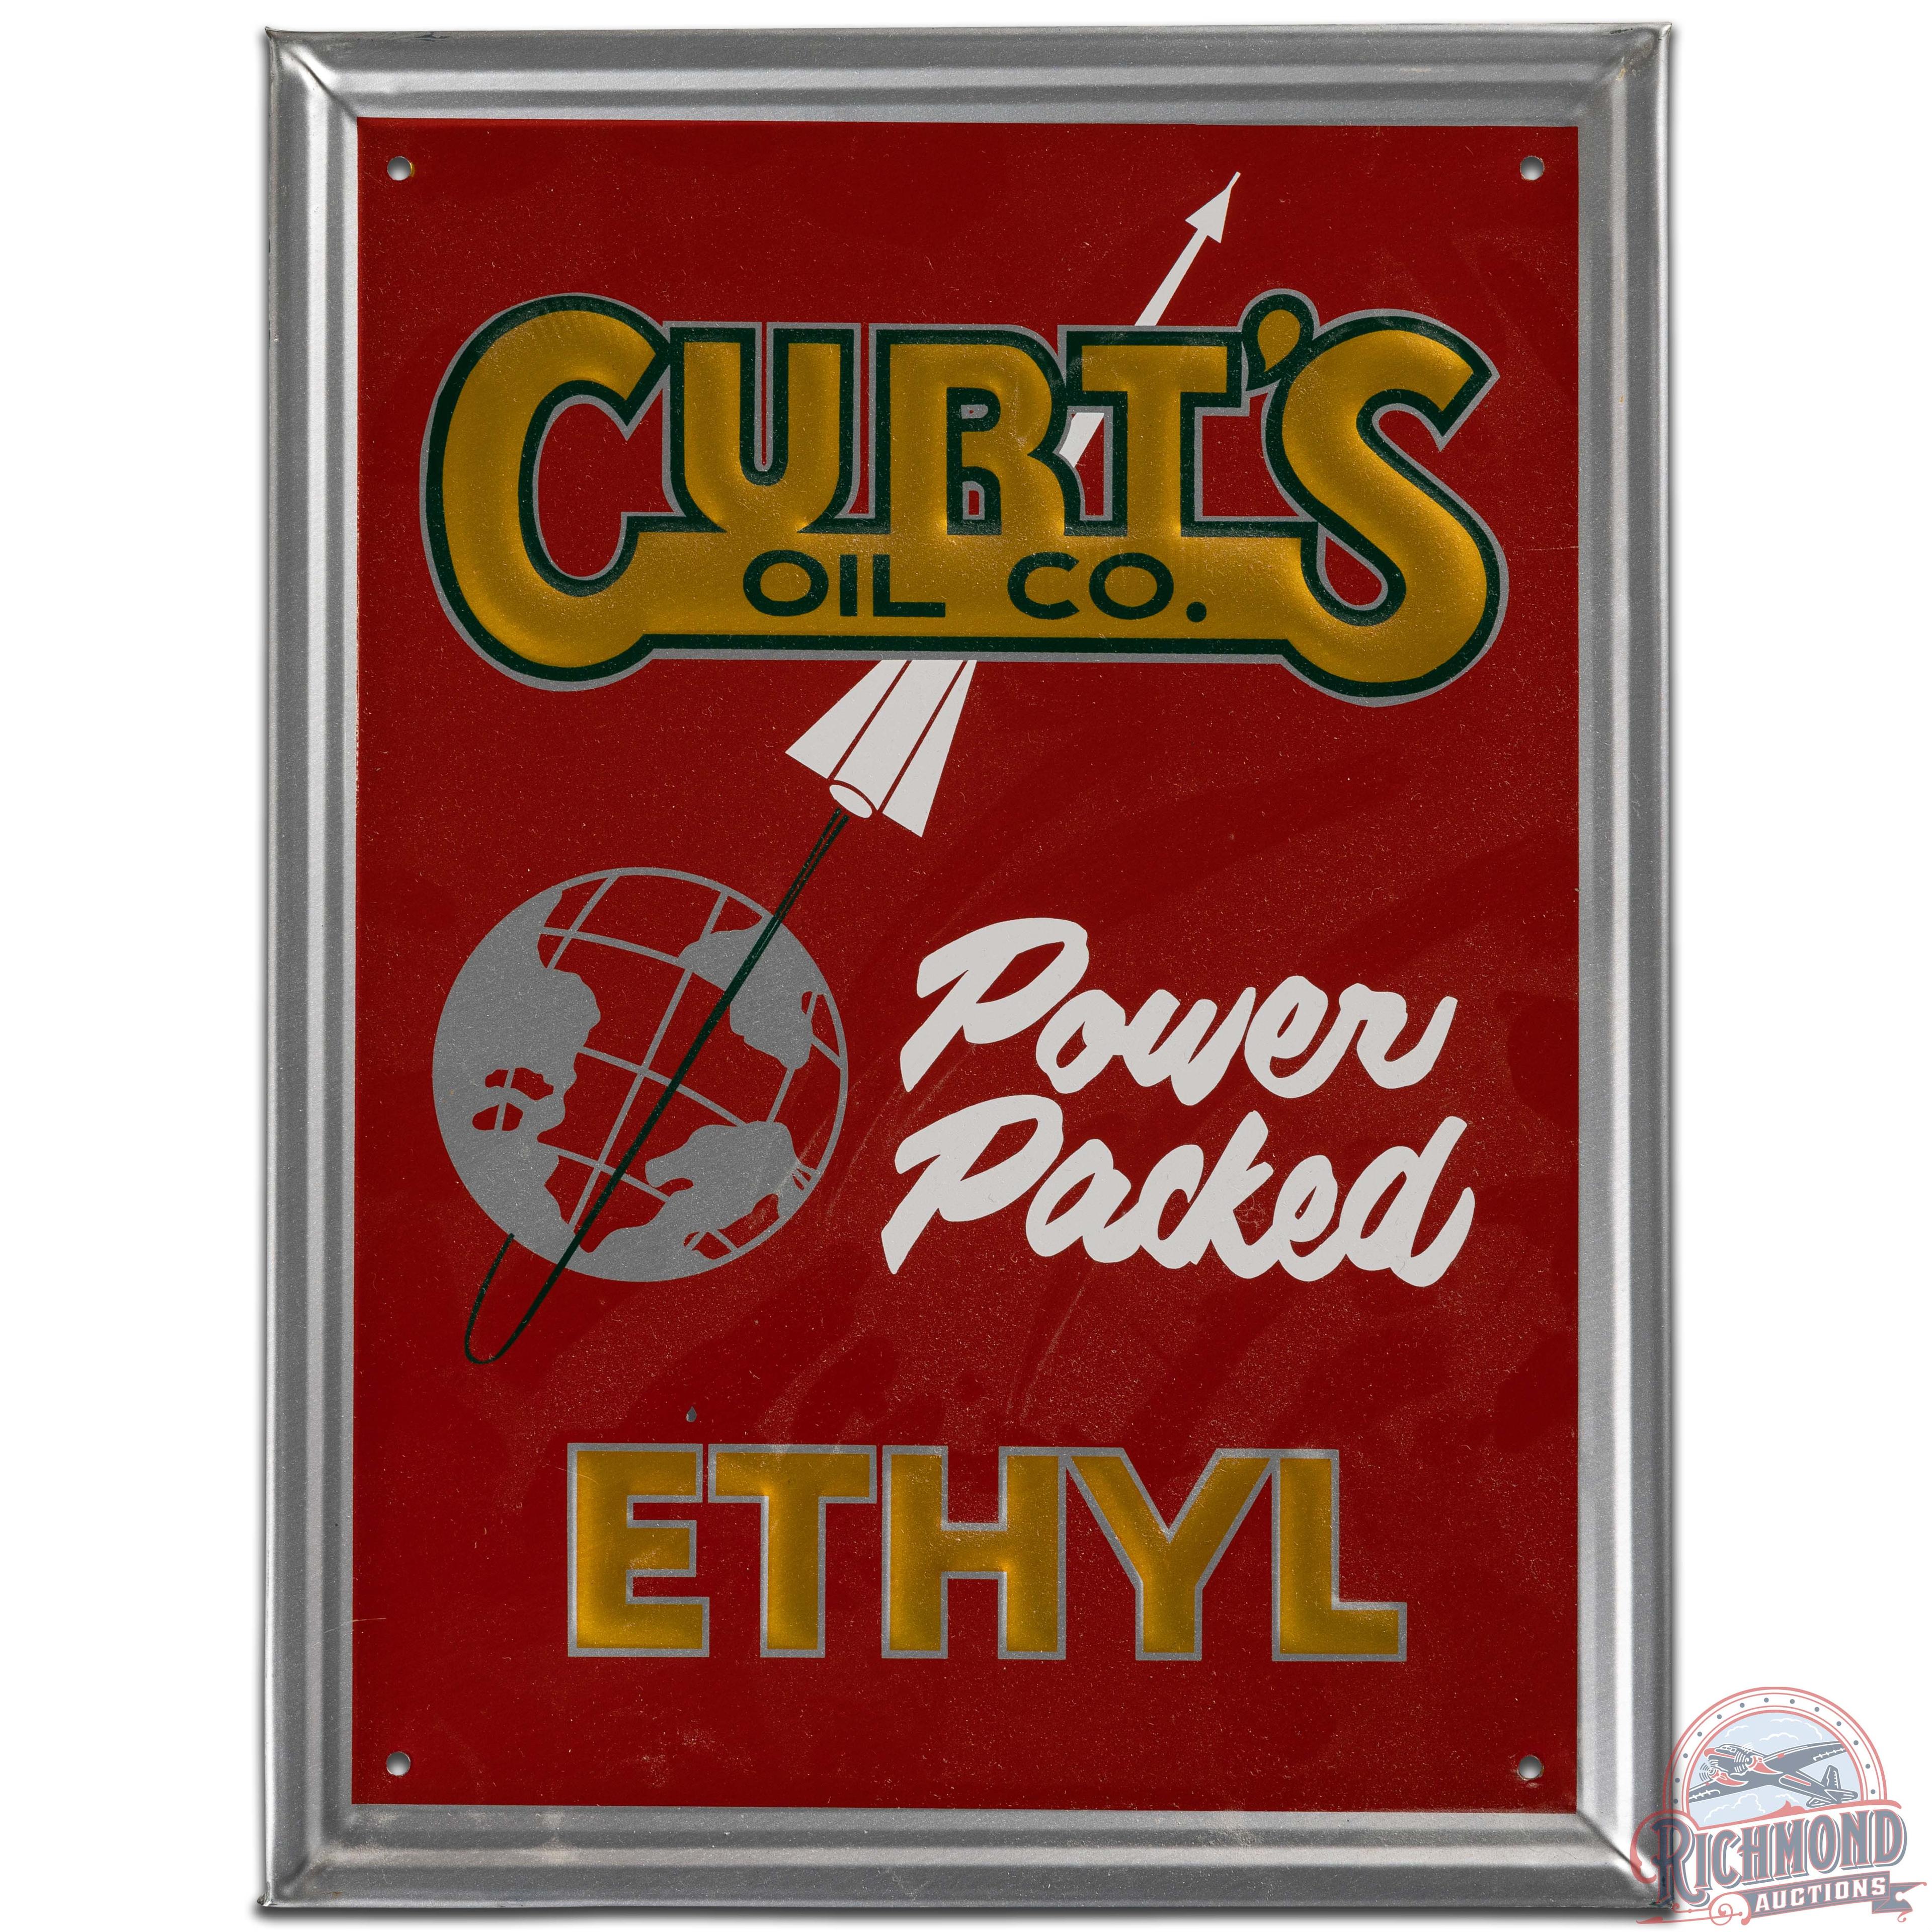 NOS Curt's Oil Co Power Packed Ethyl Emb. SS Tin Pump Plate Sign